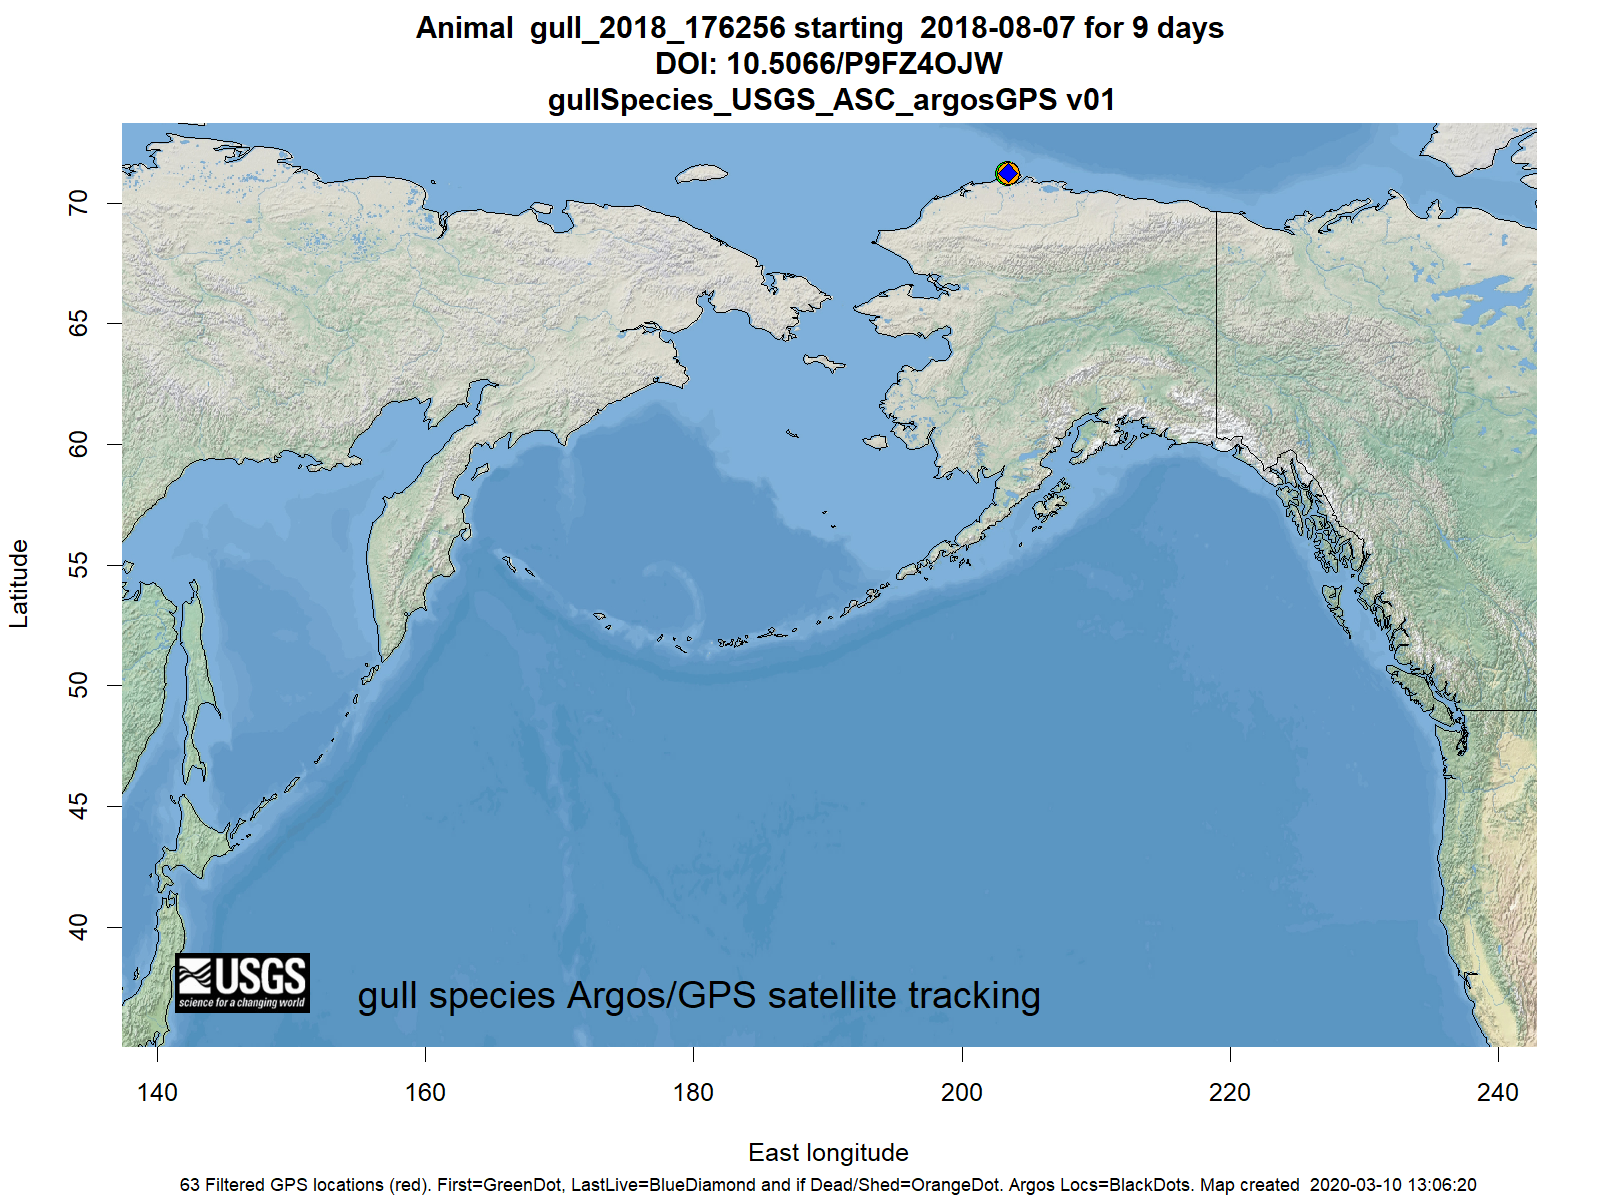 Tracking map for species gull_2018_176256